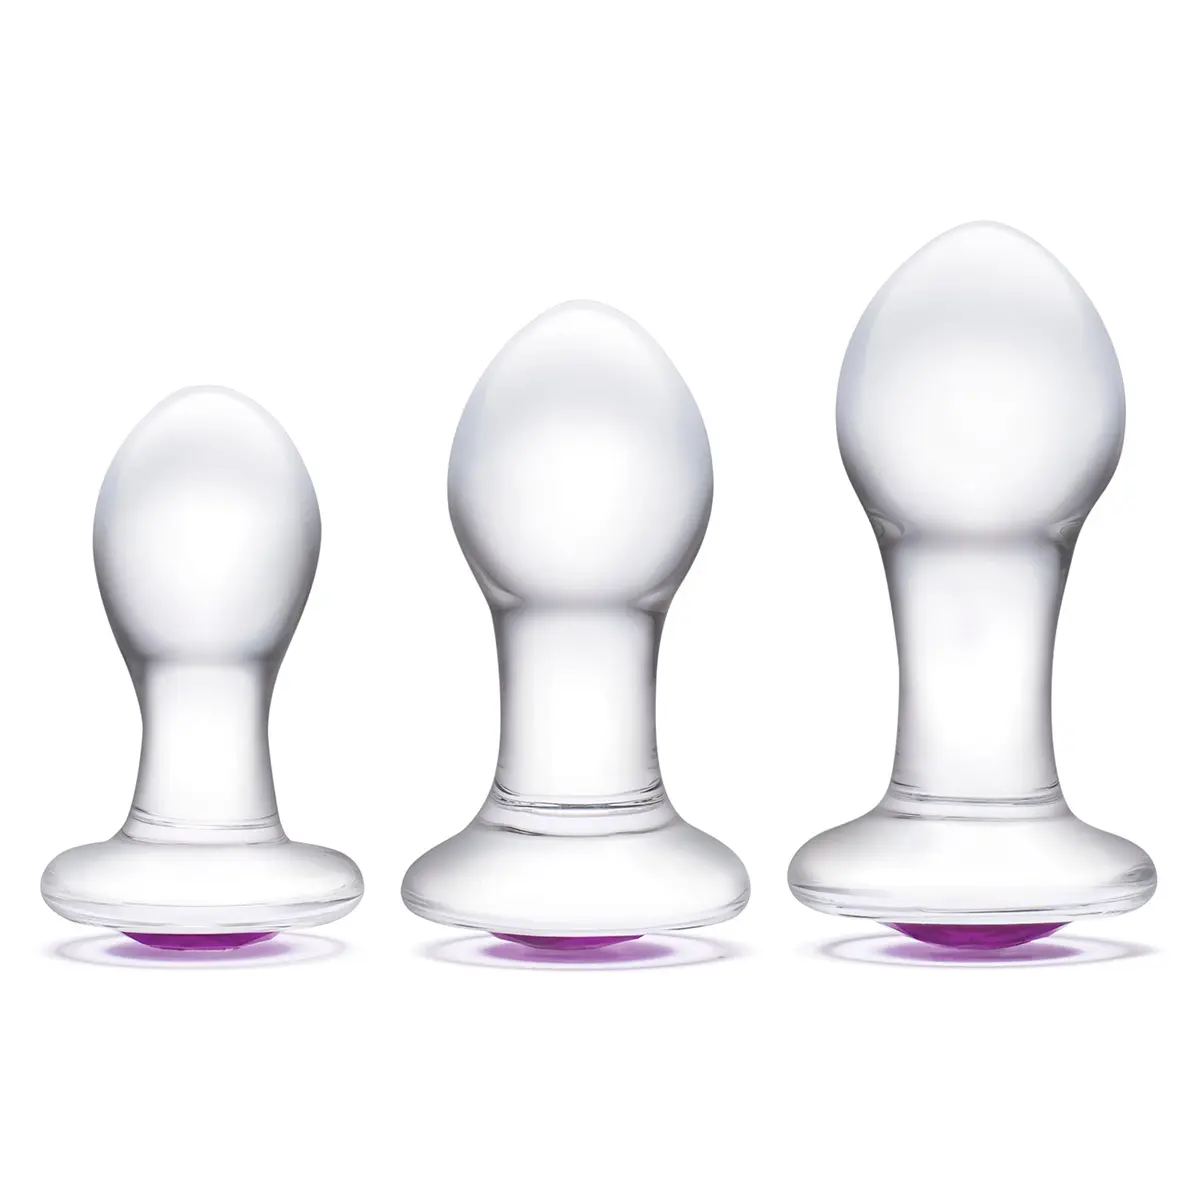 Electric EEL, Inc GLAS - 3PC BLING Glass Anal Training Set 3 / 3.5 / 4inch